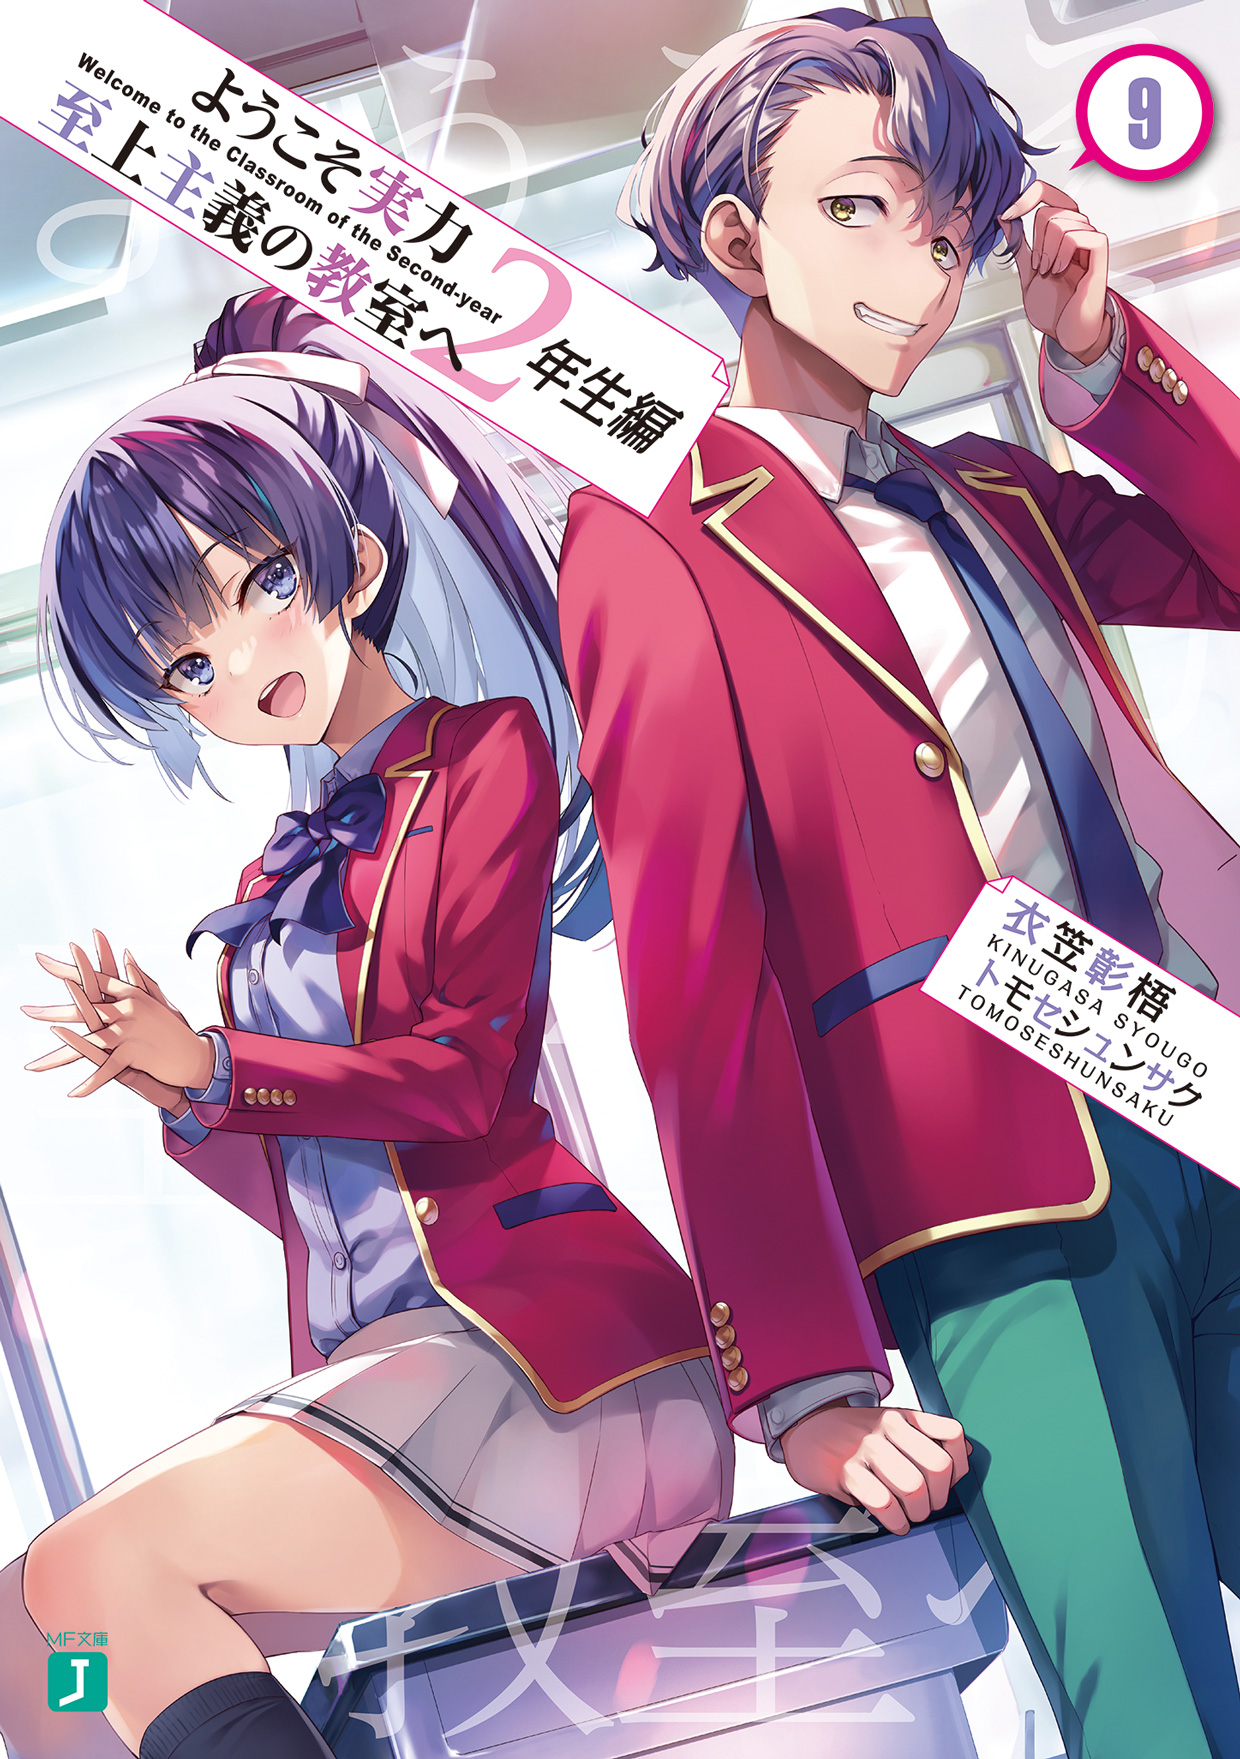 Sinopsis Light Novel Classroom Of The Elite 2nd Year Vol. 3 Chapter 2-4 